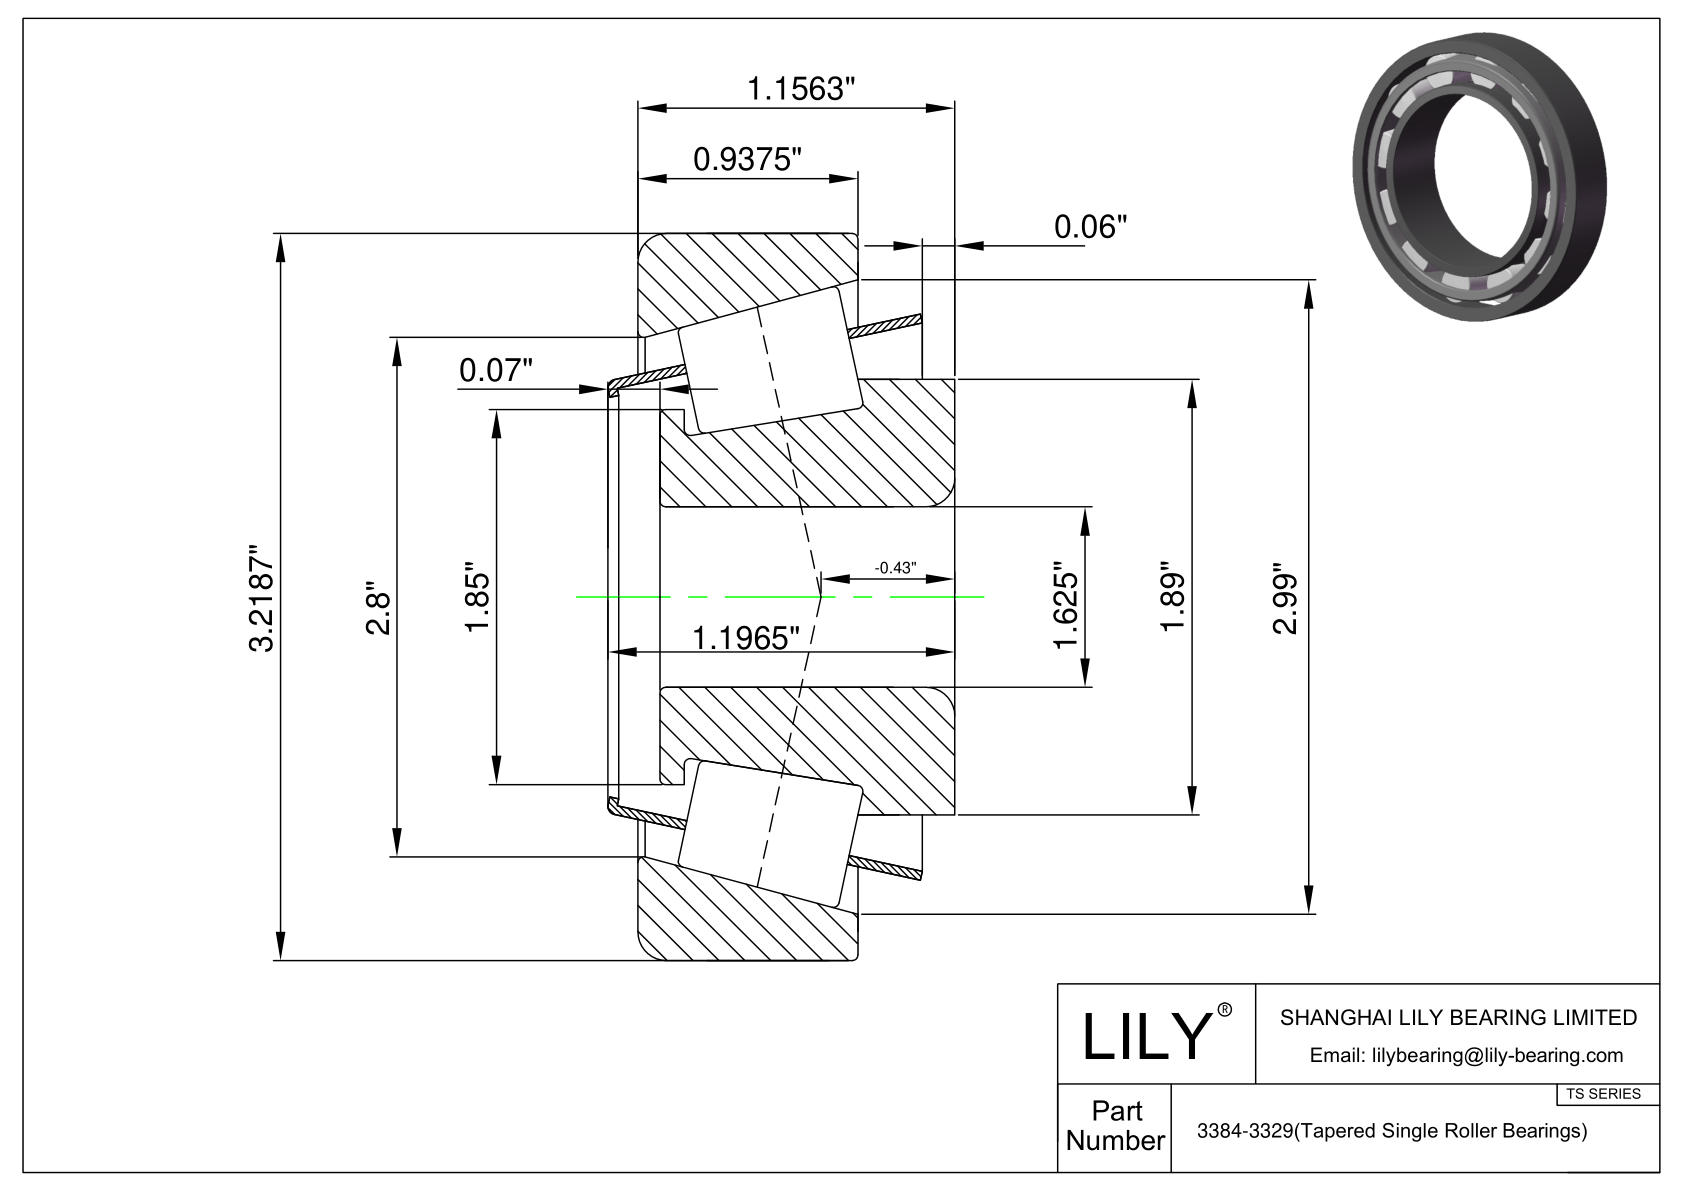 3384-3329 TS (Tapered Single Roller Bearings) (Imperial) cad drawing